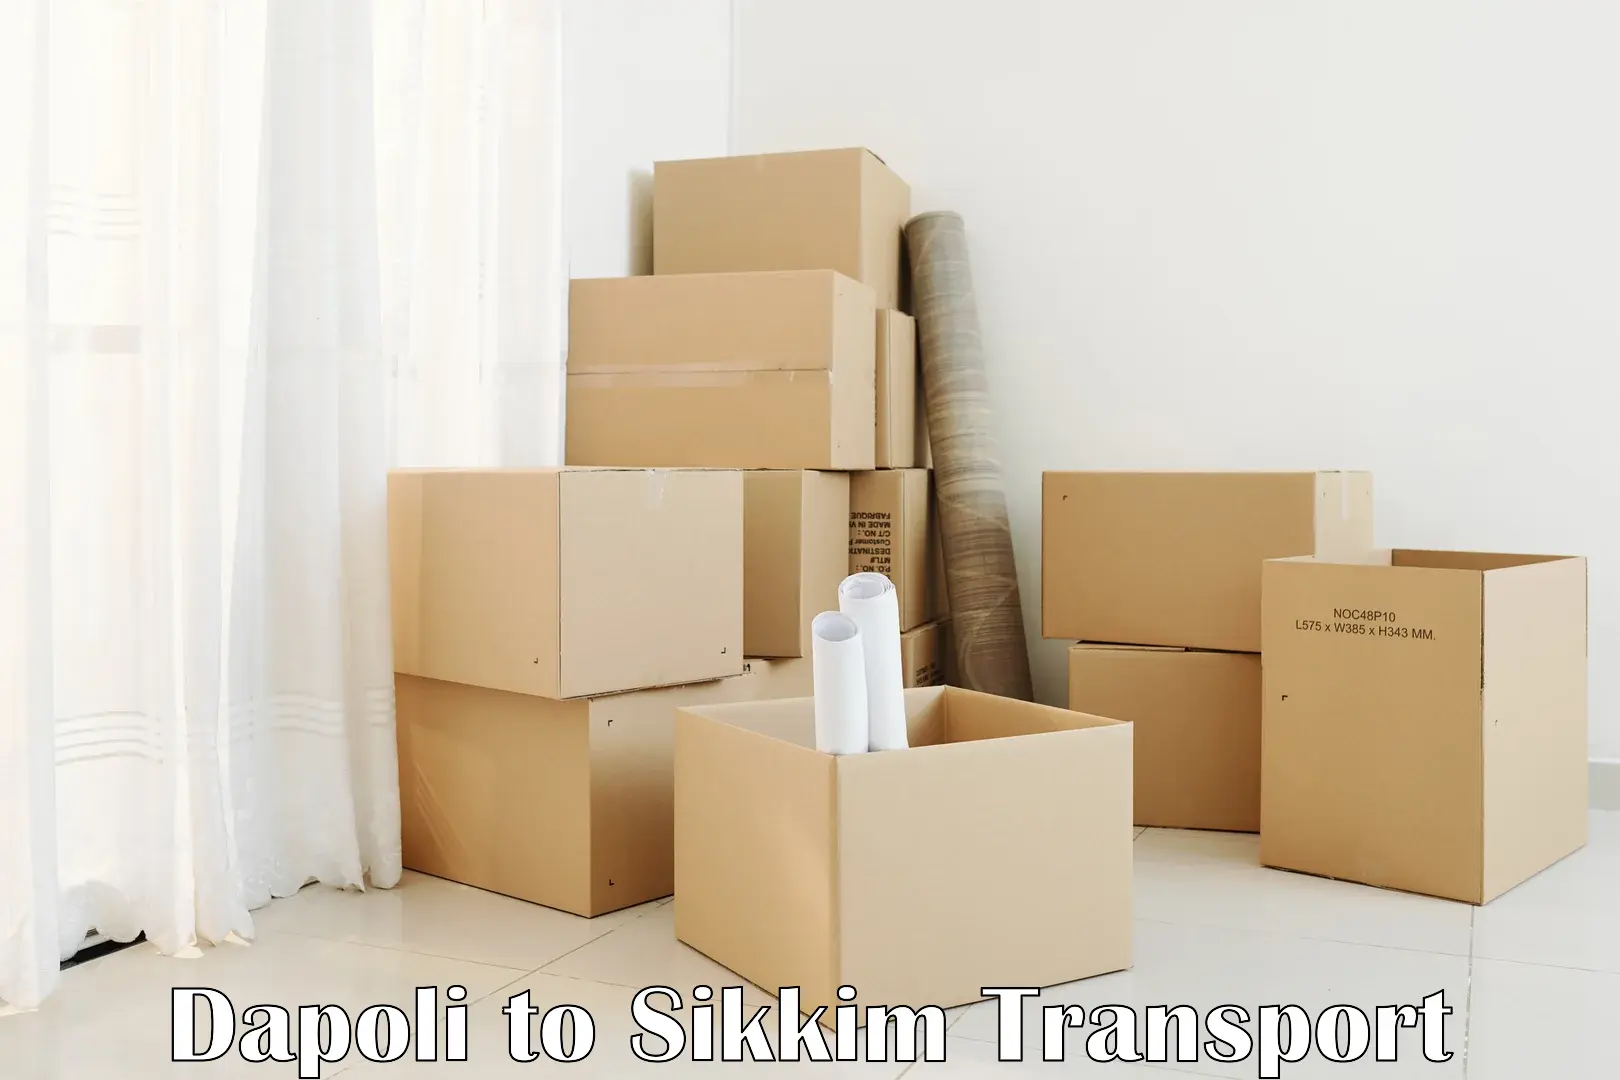 Pick up transport service Dapoli to East Sikkim